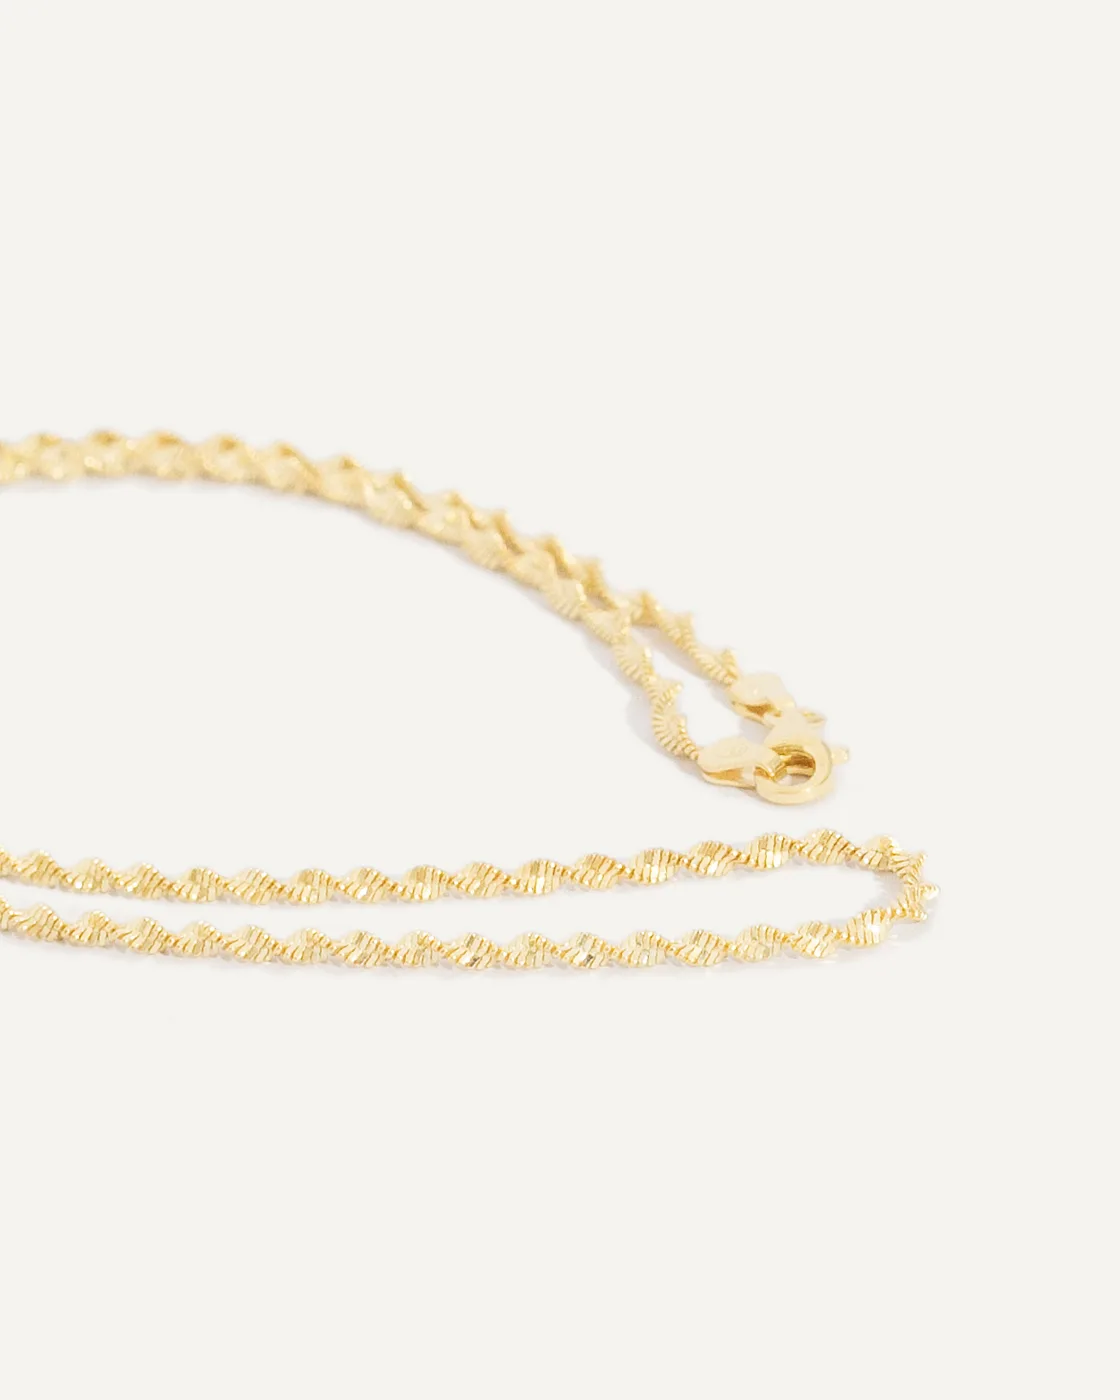 Ovio Gold-Plated Sterling Silver Chain